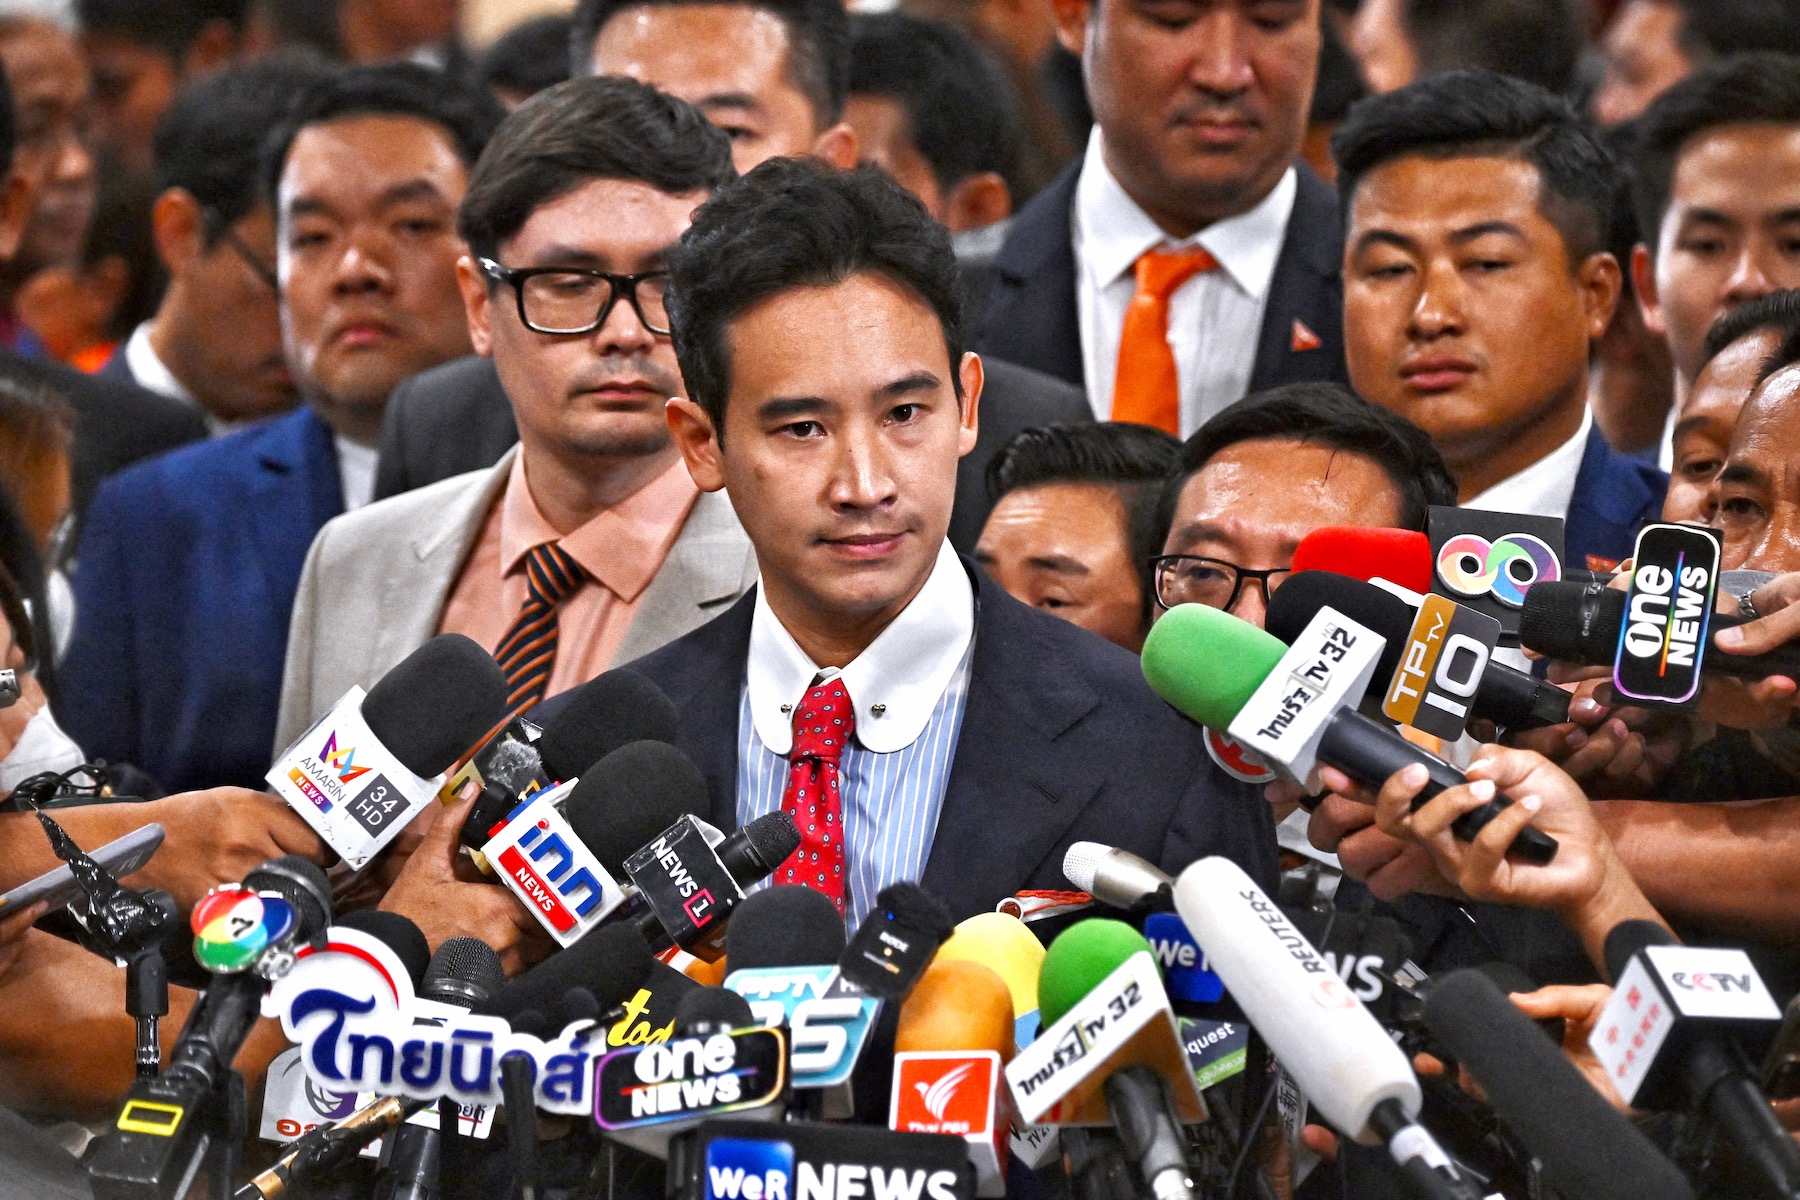 This Progressive Thai Opposition Politician Who Was Blocked From Being Prime Minister Has Been Found Not Guilty Of Violating Election Laws